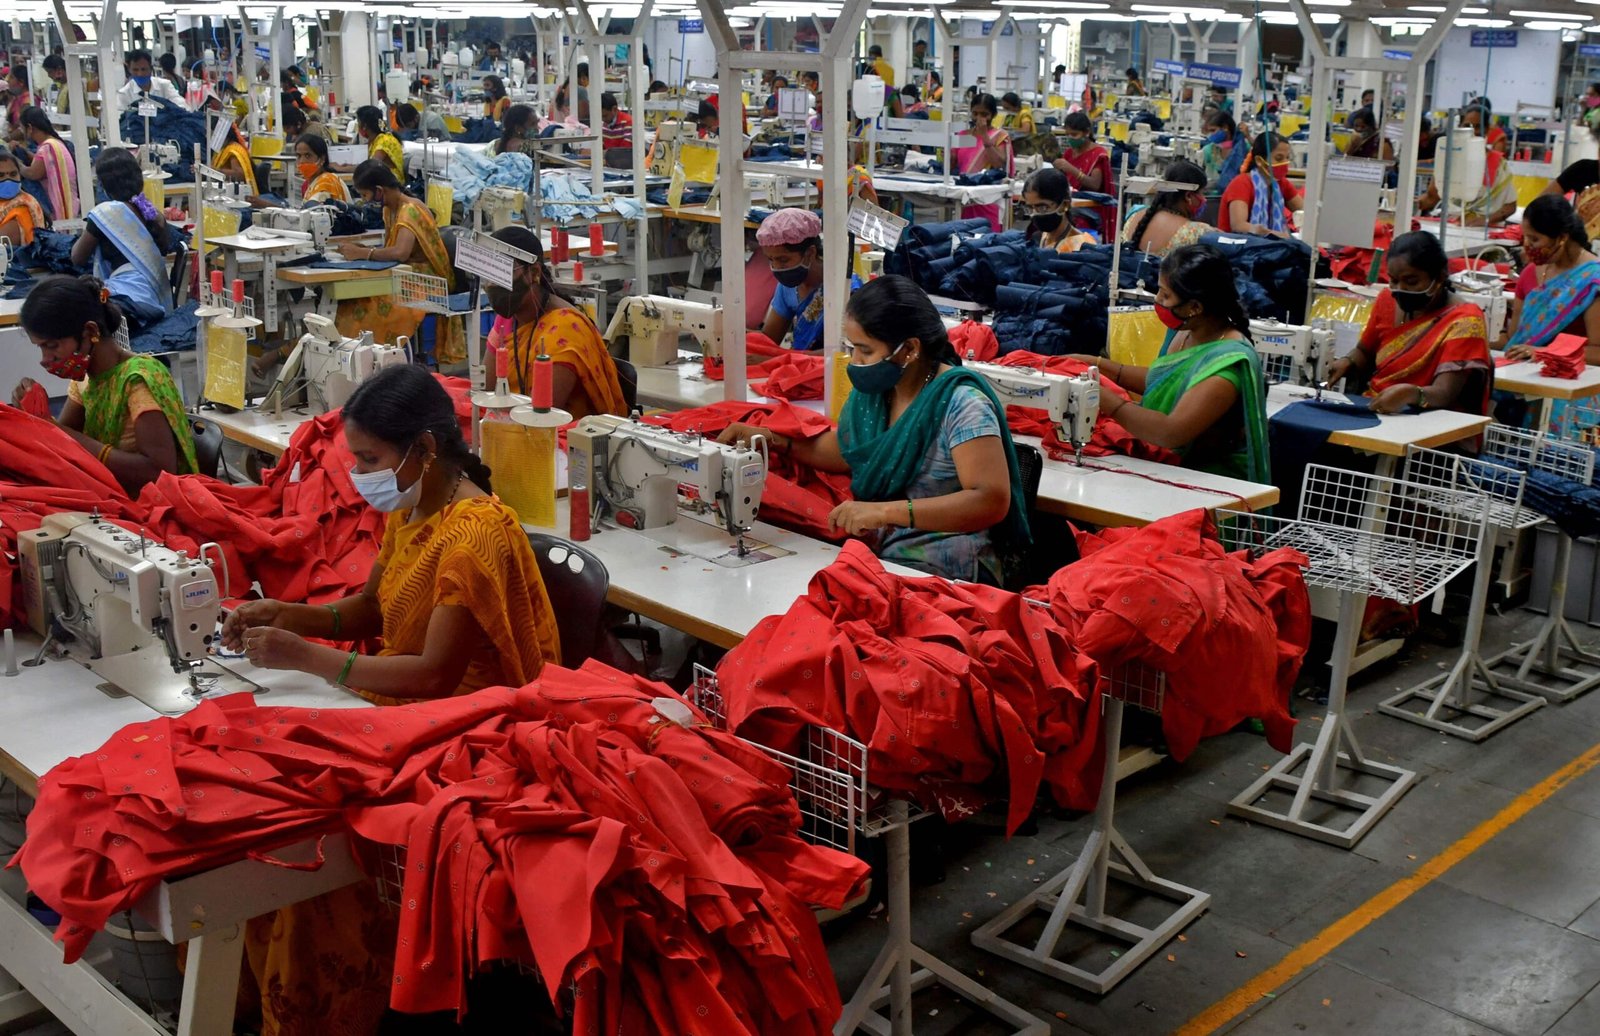 Textile entrepreneurs hope for better stability with reduction in freight charges, cotton prices